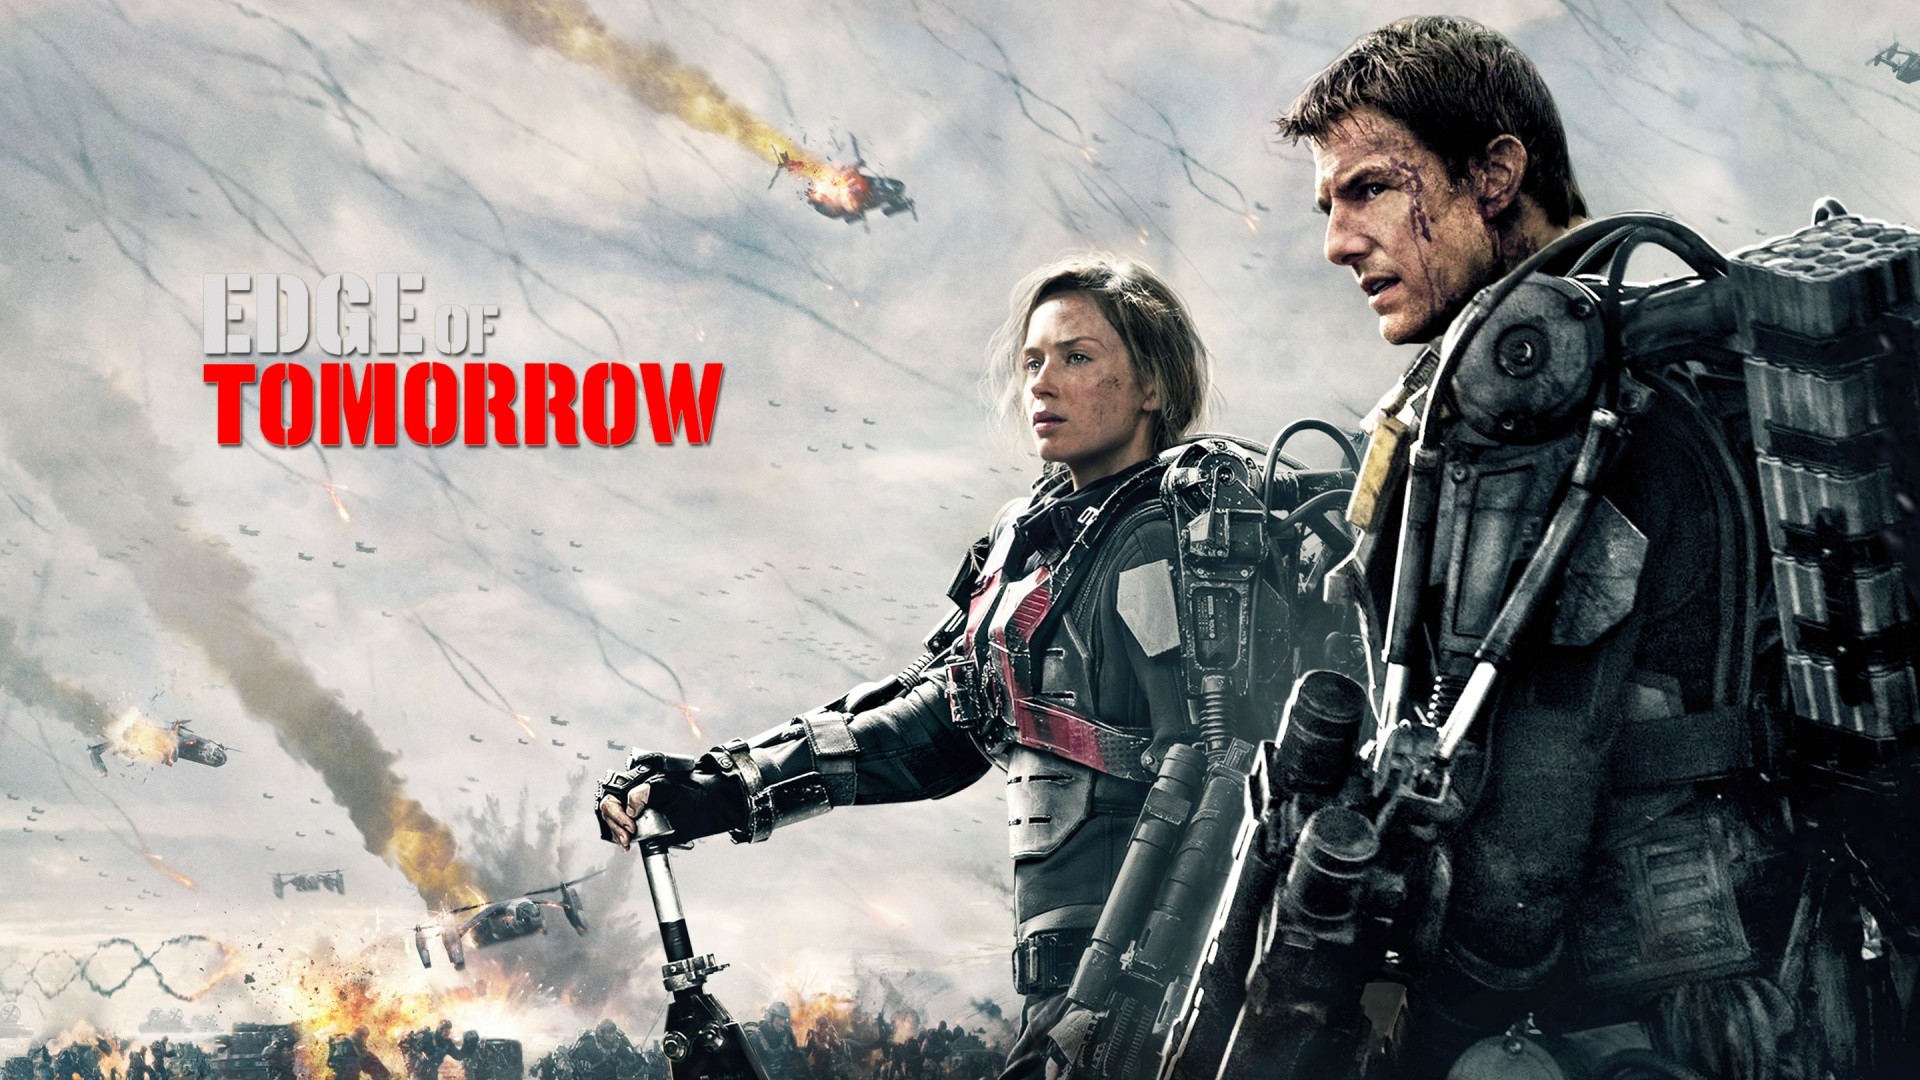 1920x1080 Description: The Wallpaper above is Tom cruise edge of tomorrow Wallpaper  in Resolution .